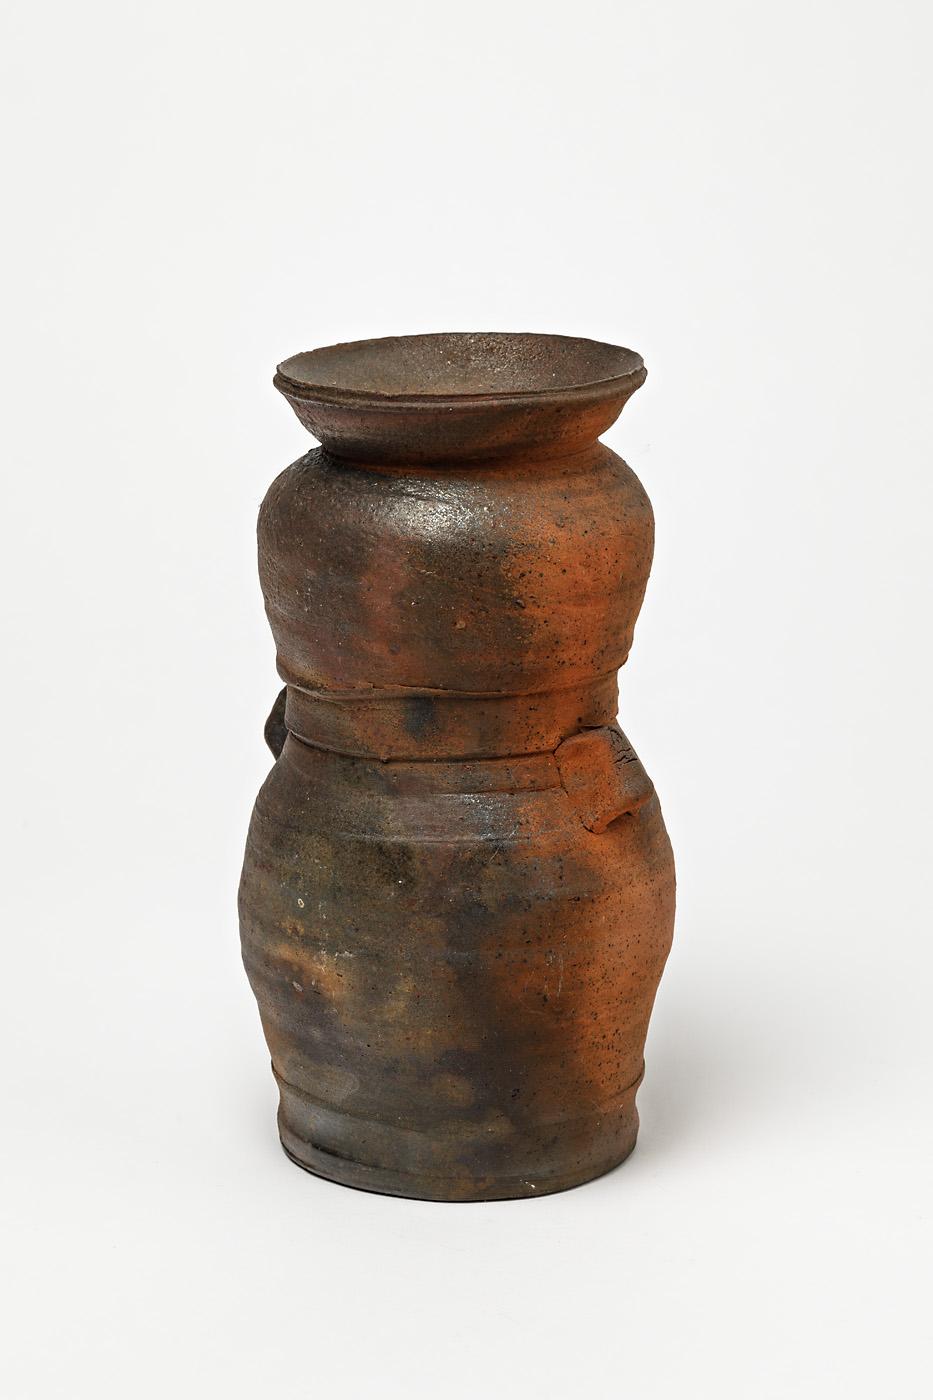 French Beautiful and Decorative Brown Ceramic Vase by Steen Kepp La Borne, 1975